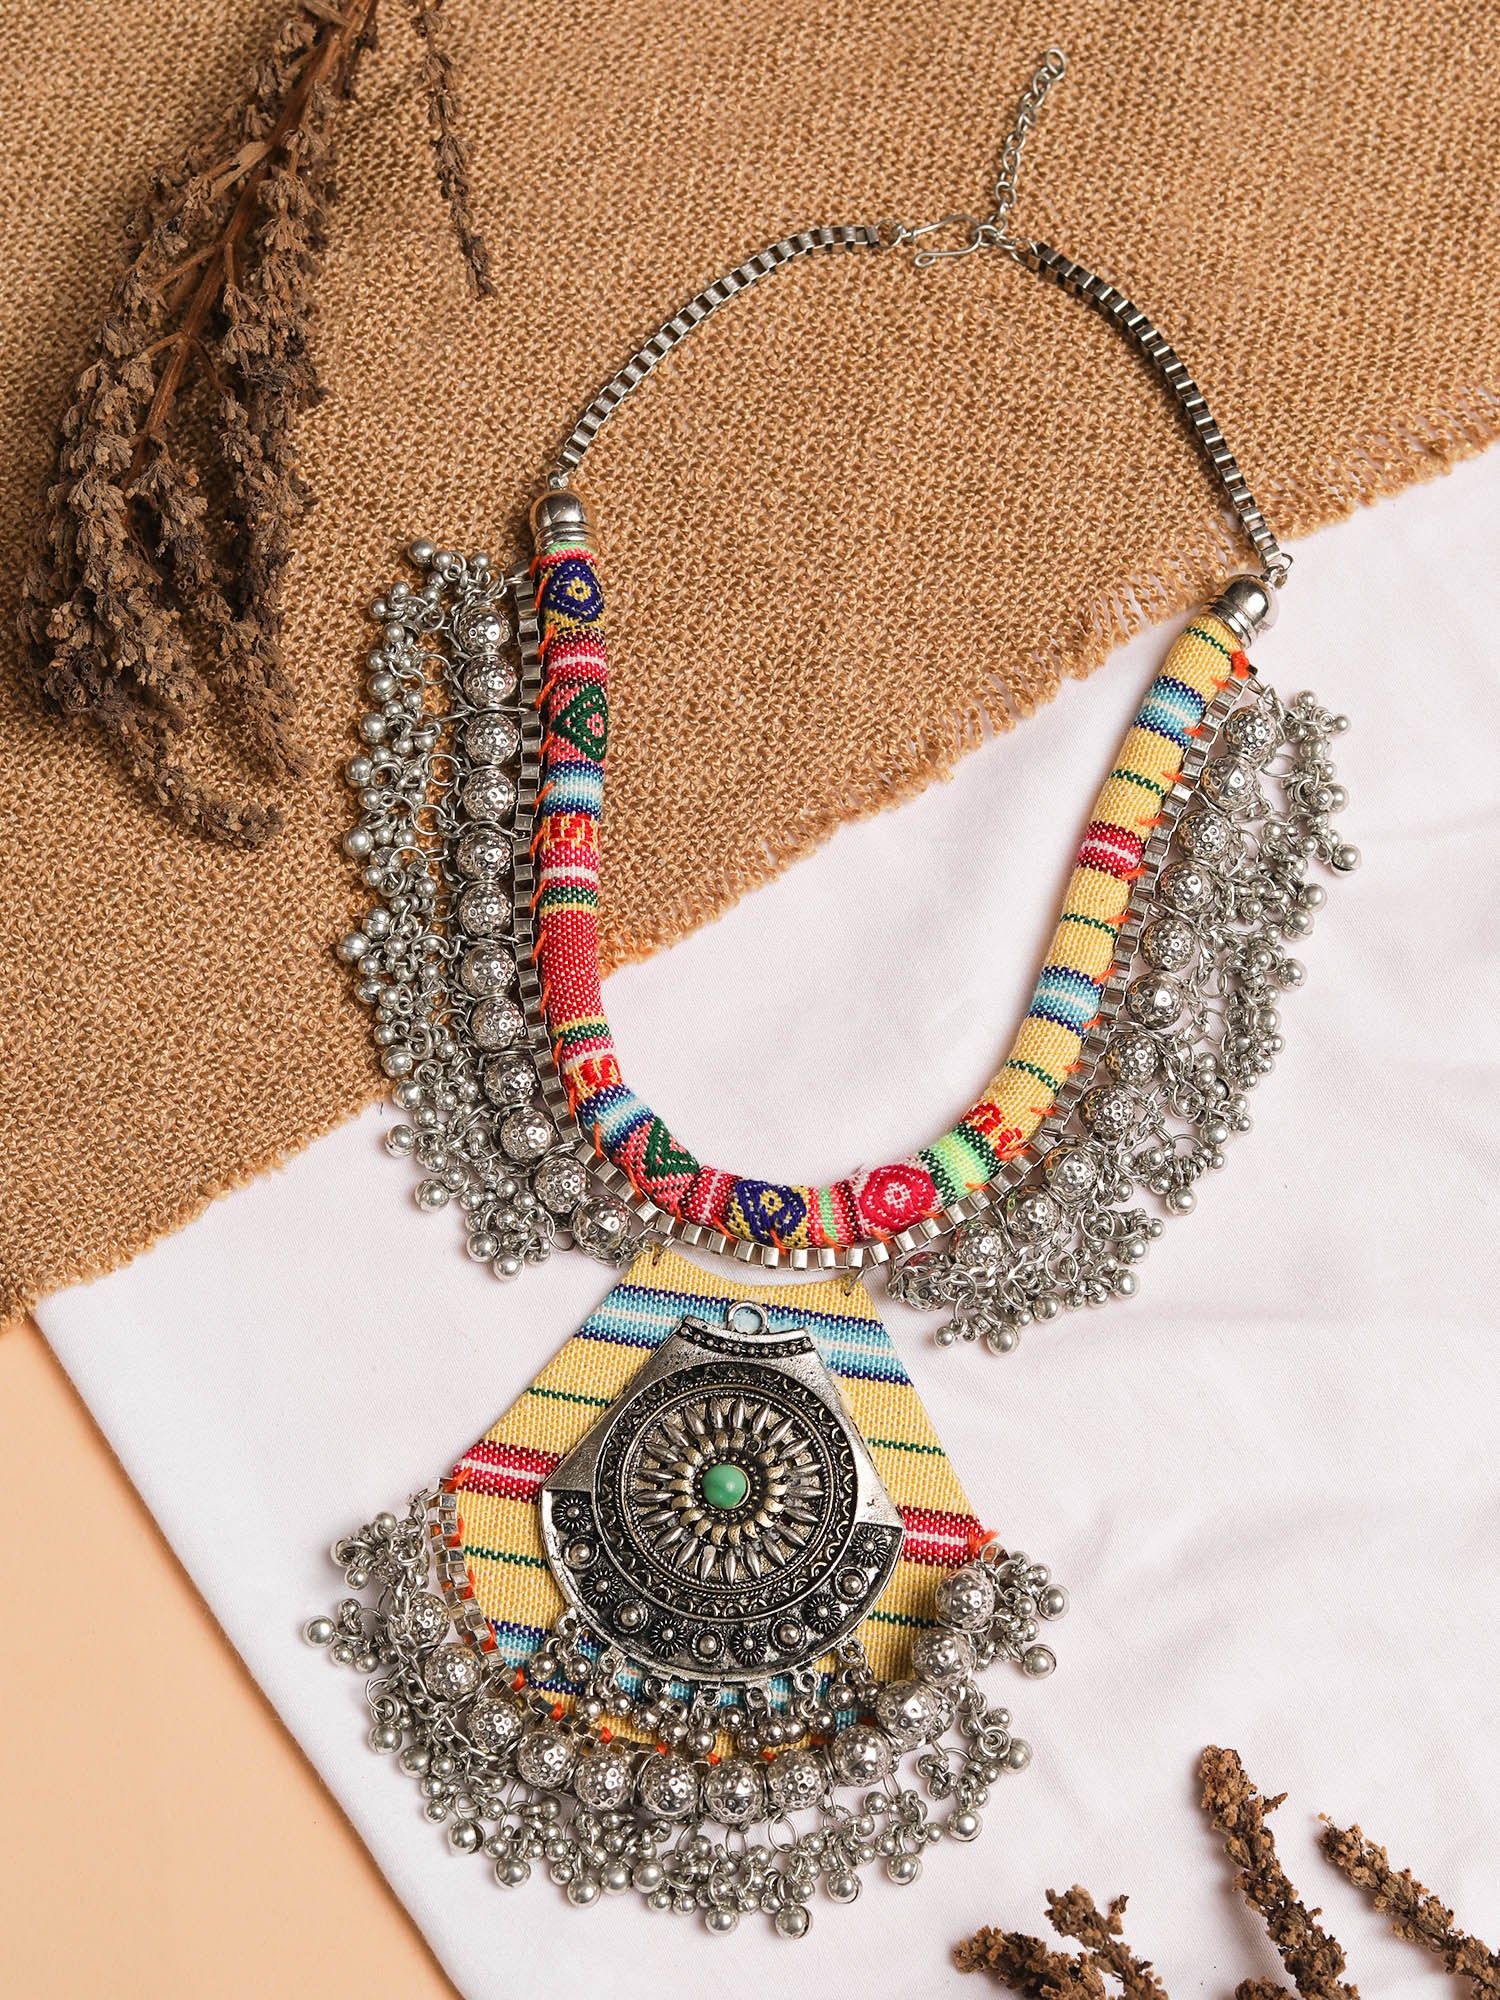 Vintage Embroidered Boho Necklace By Qurcha - Mogra Designs